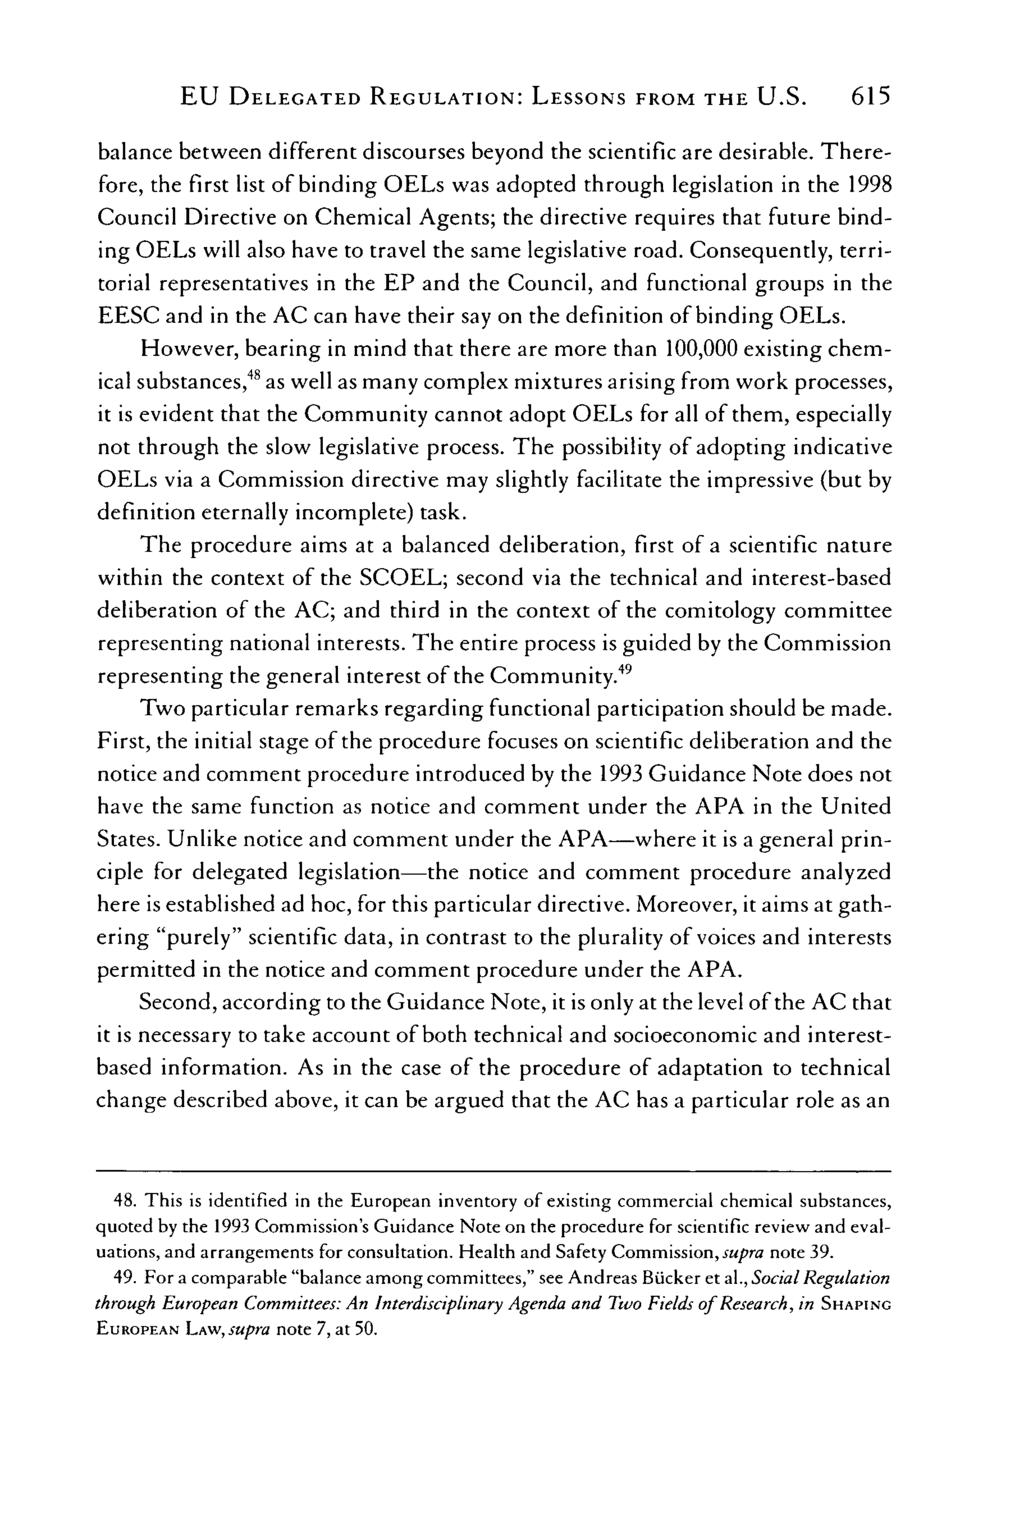 EU DELEGATED REGULATION: LESSONS FROM THE U.S. 615 balance between different discourses beyond the scientific are desirable.